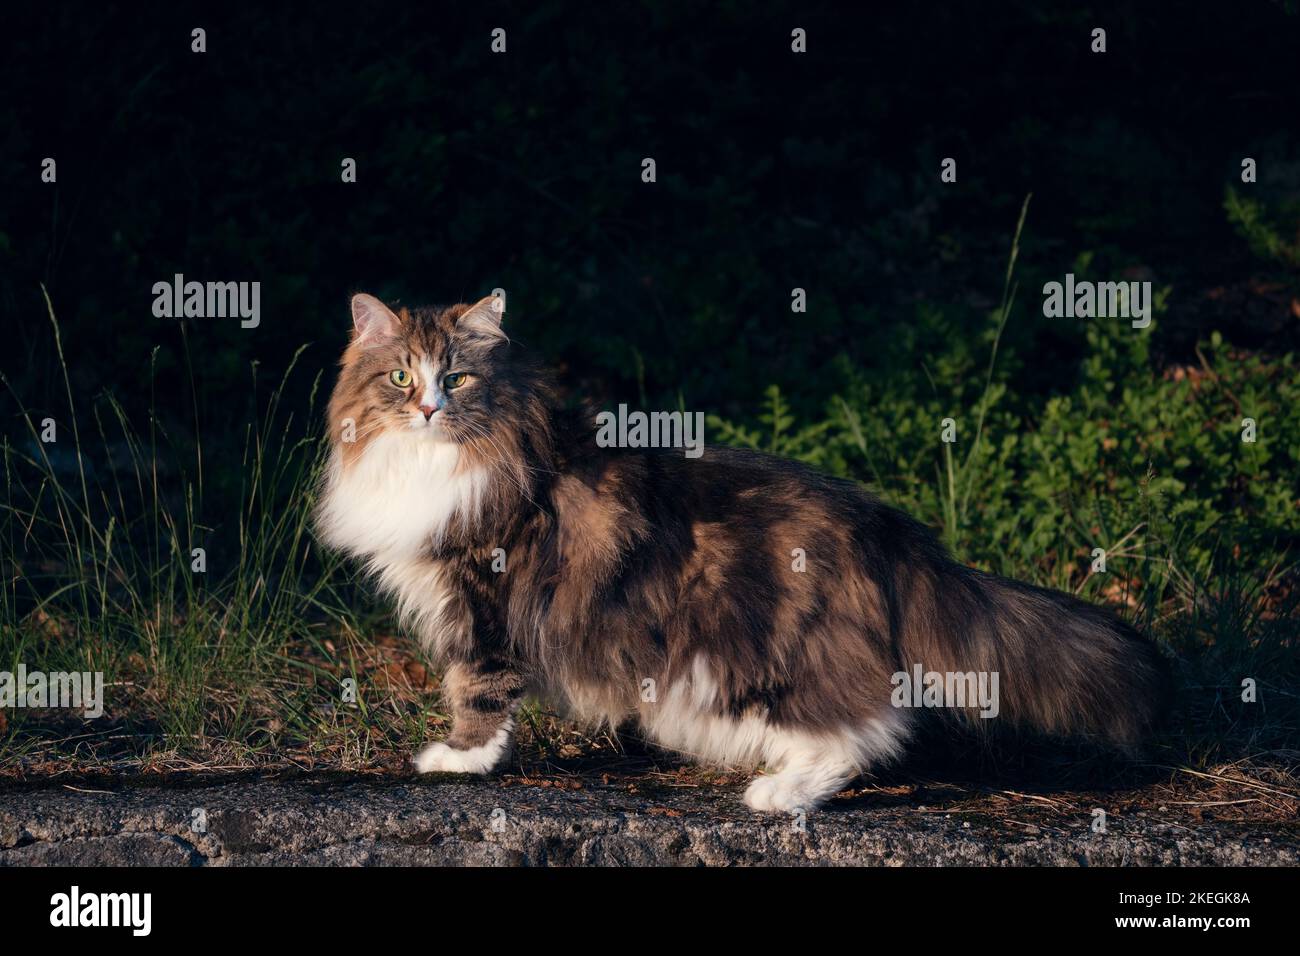 Alvin - Big Siberian cat with long hair in the forest Stock Photo